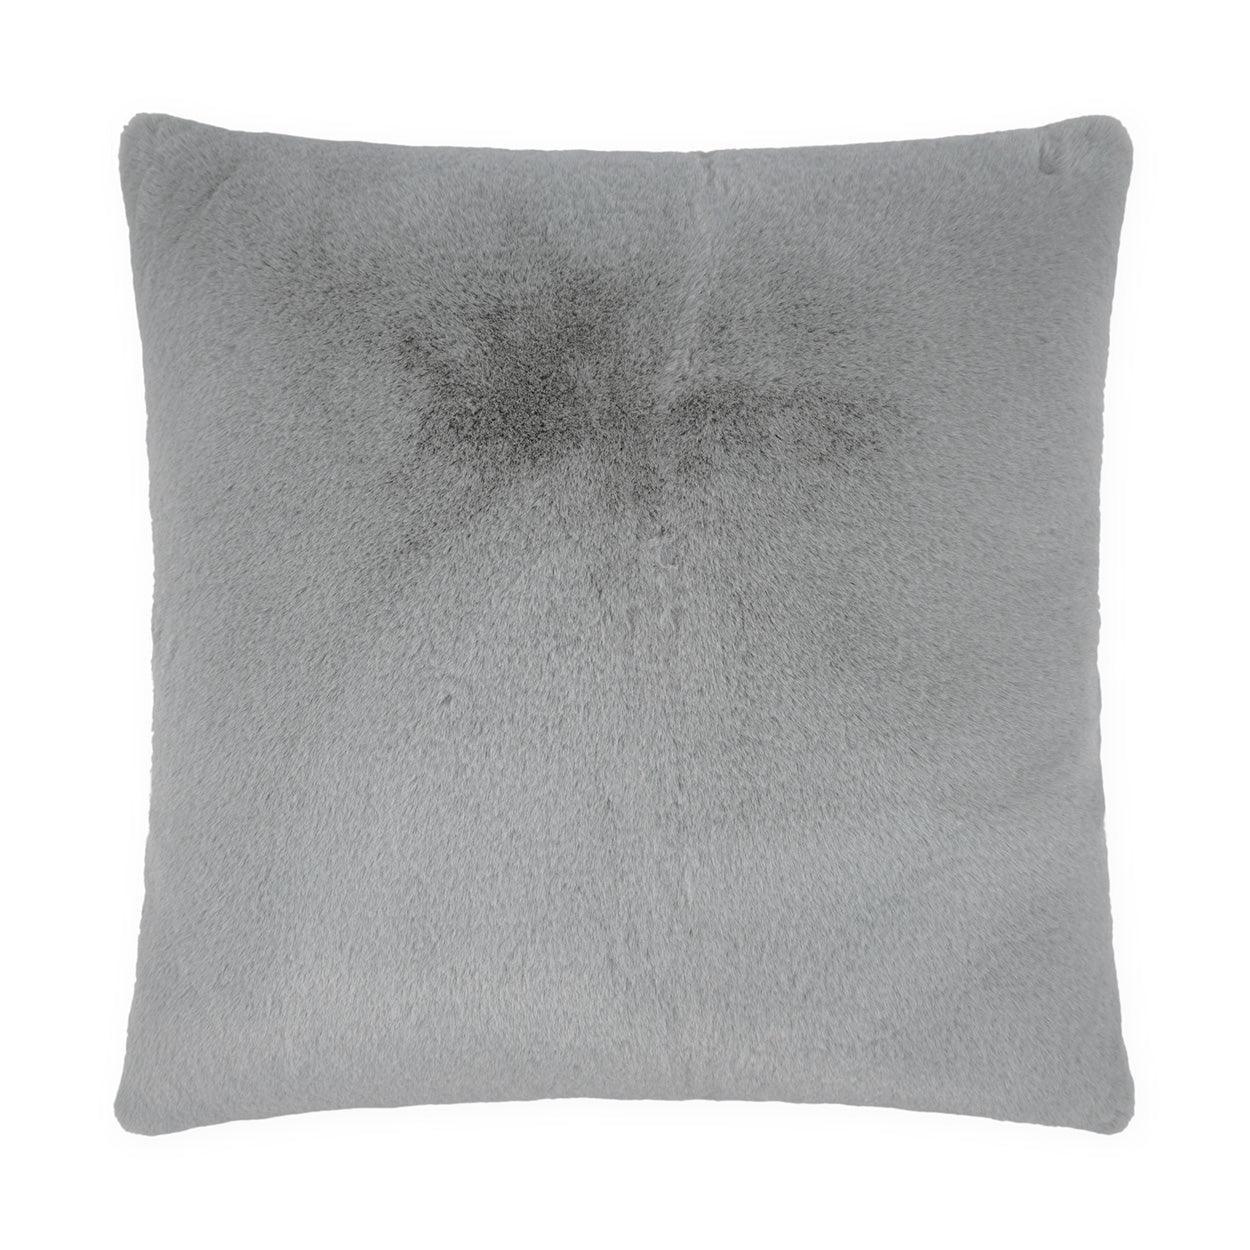 Arlo Silver Faux Fur Solid Grey Large Throw Pillow With Insert - Uptown Sebastian